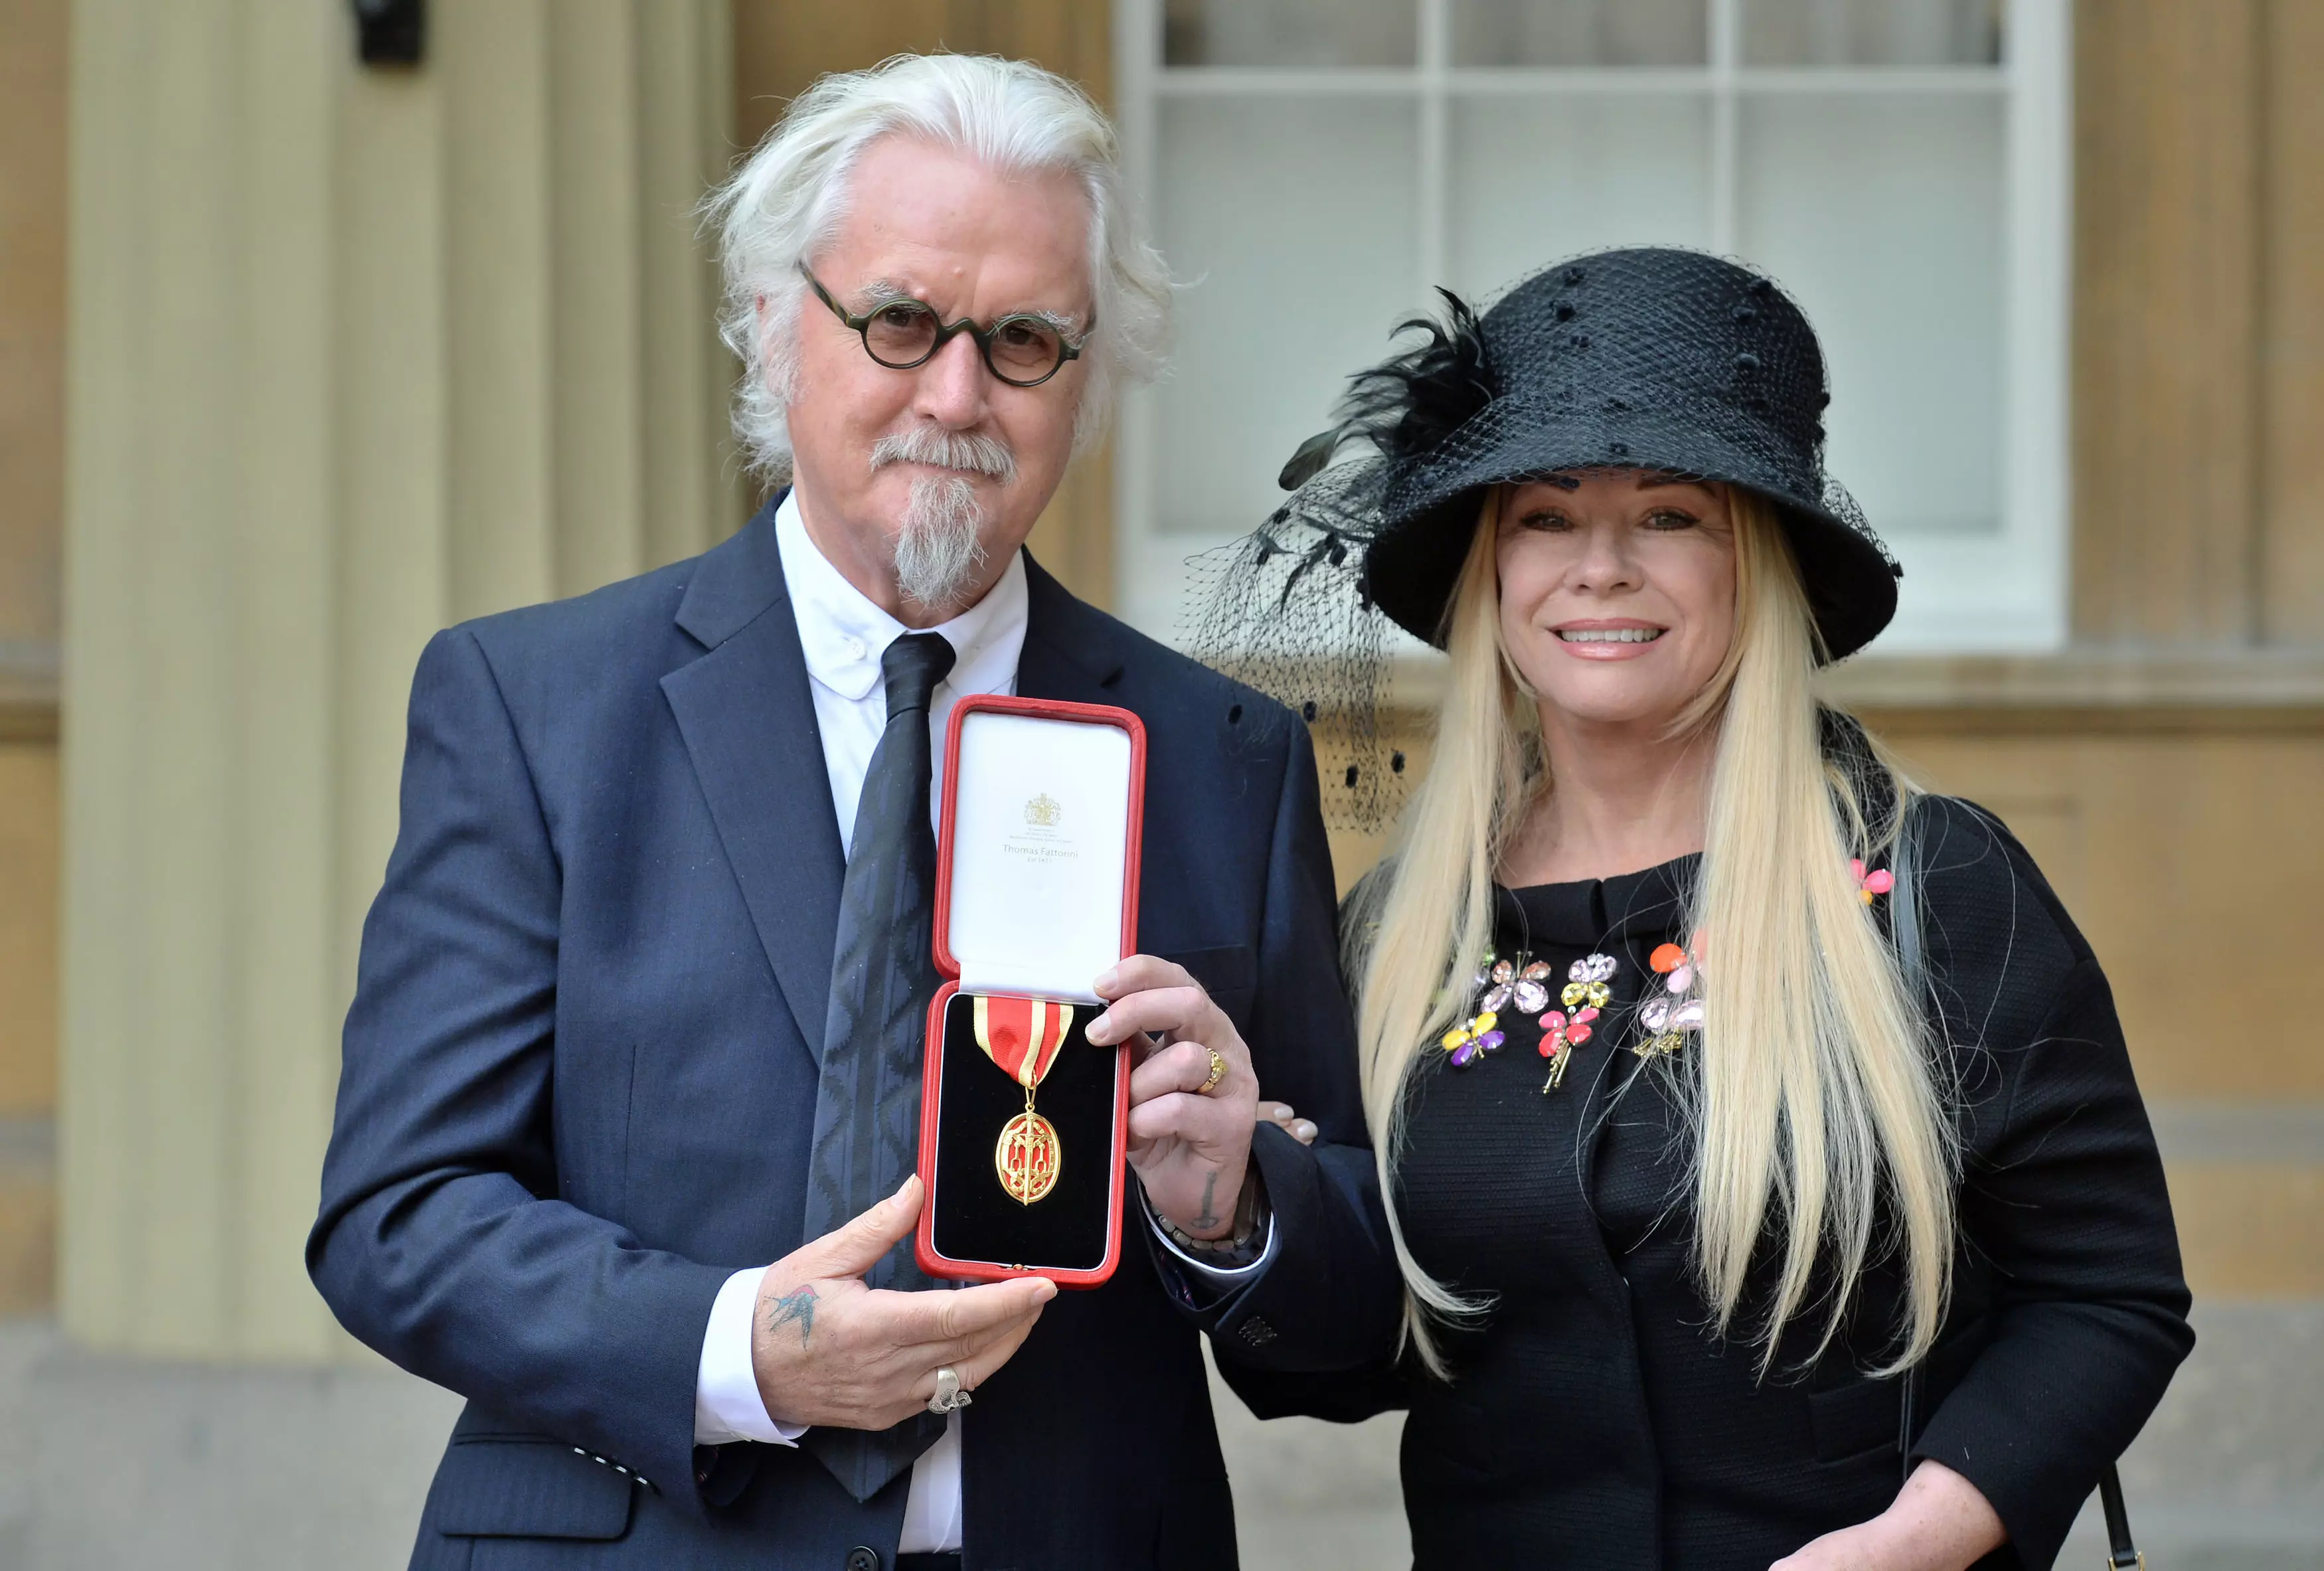 Sir Billy Connolly with his wife Pamela Stephenson after being knighted by the Duke of Cambridge.